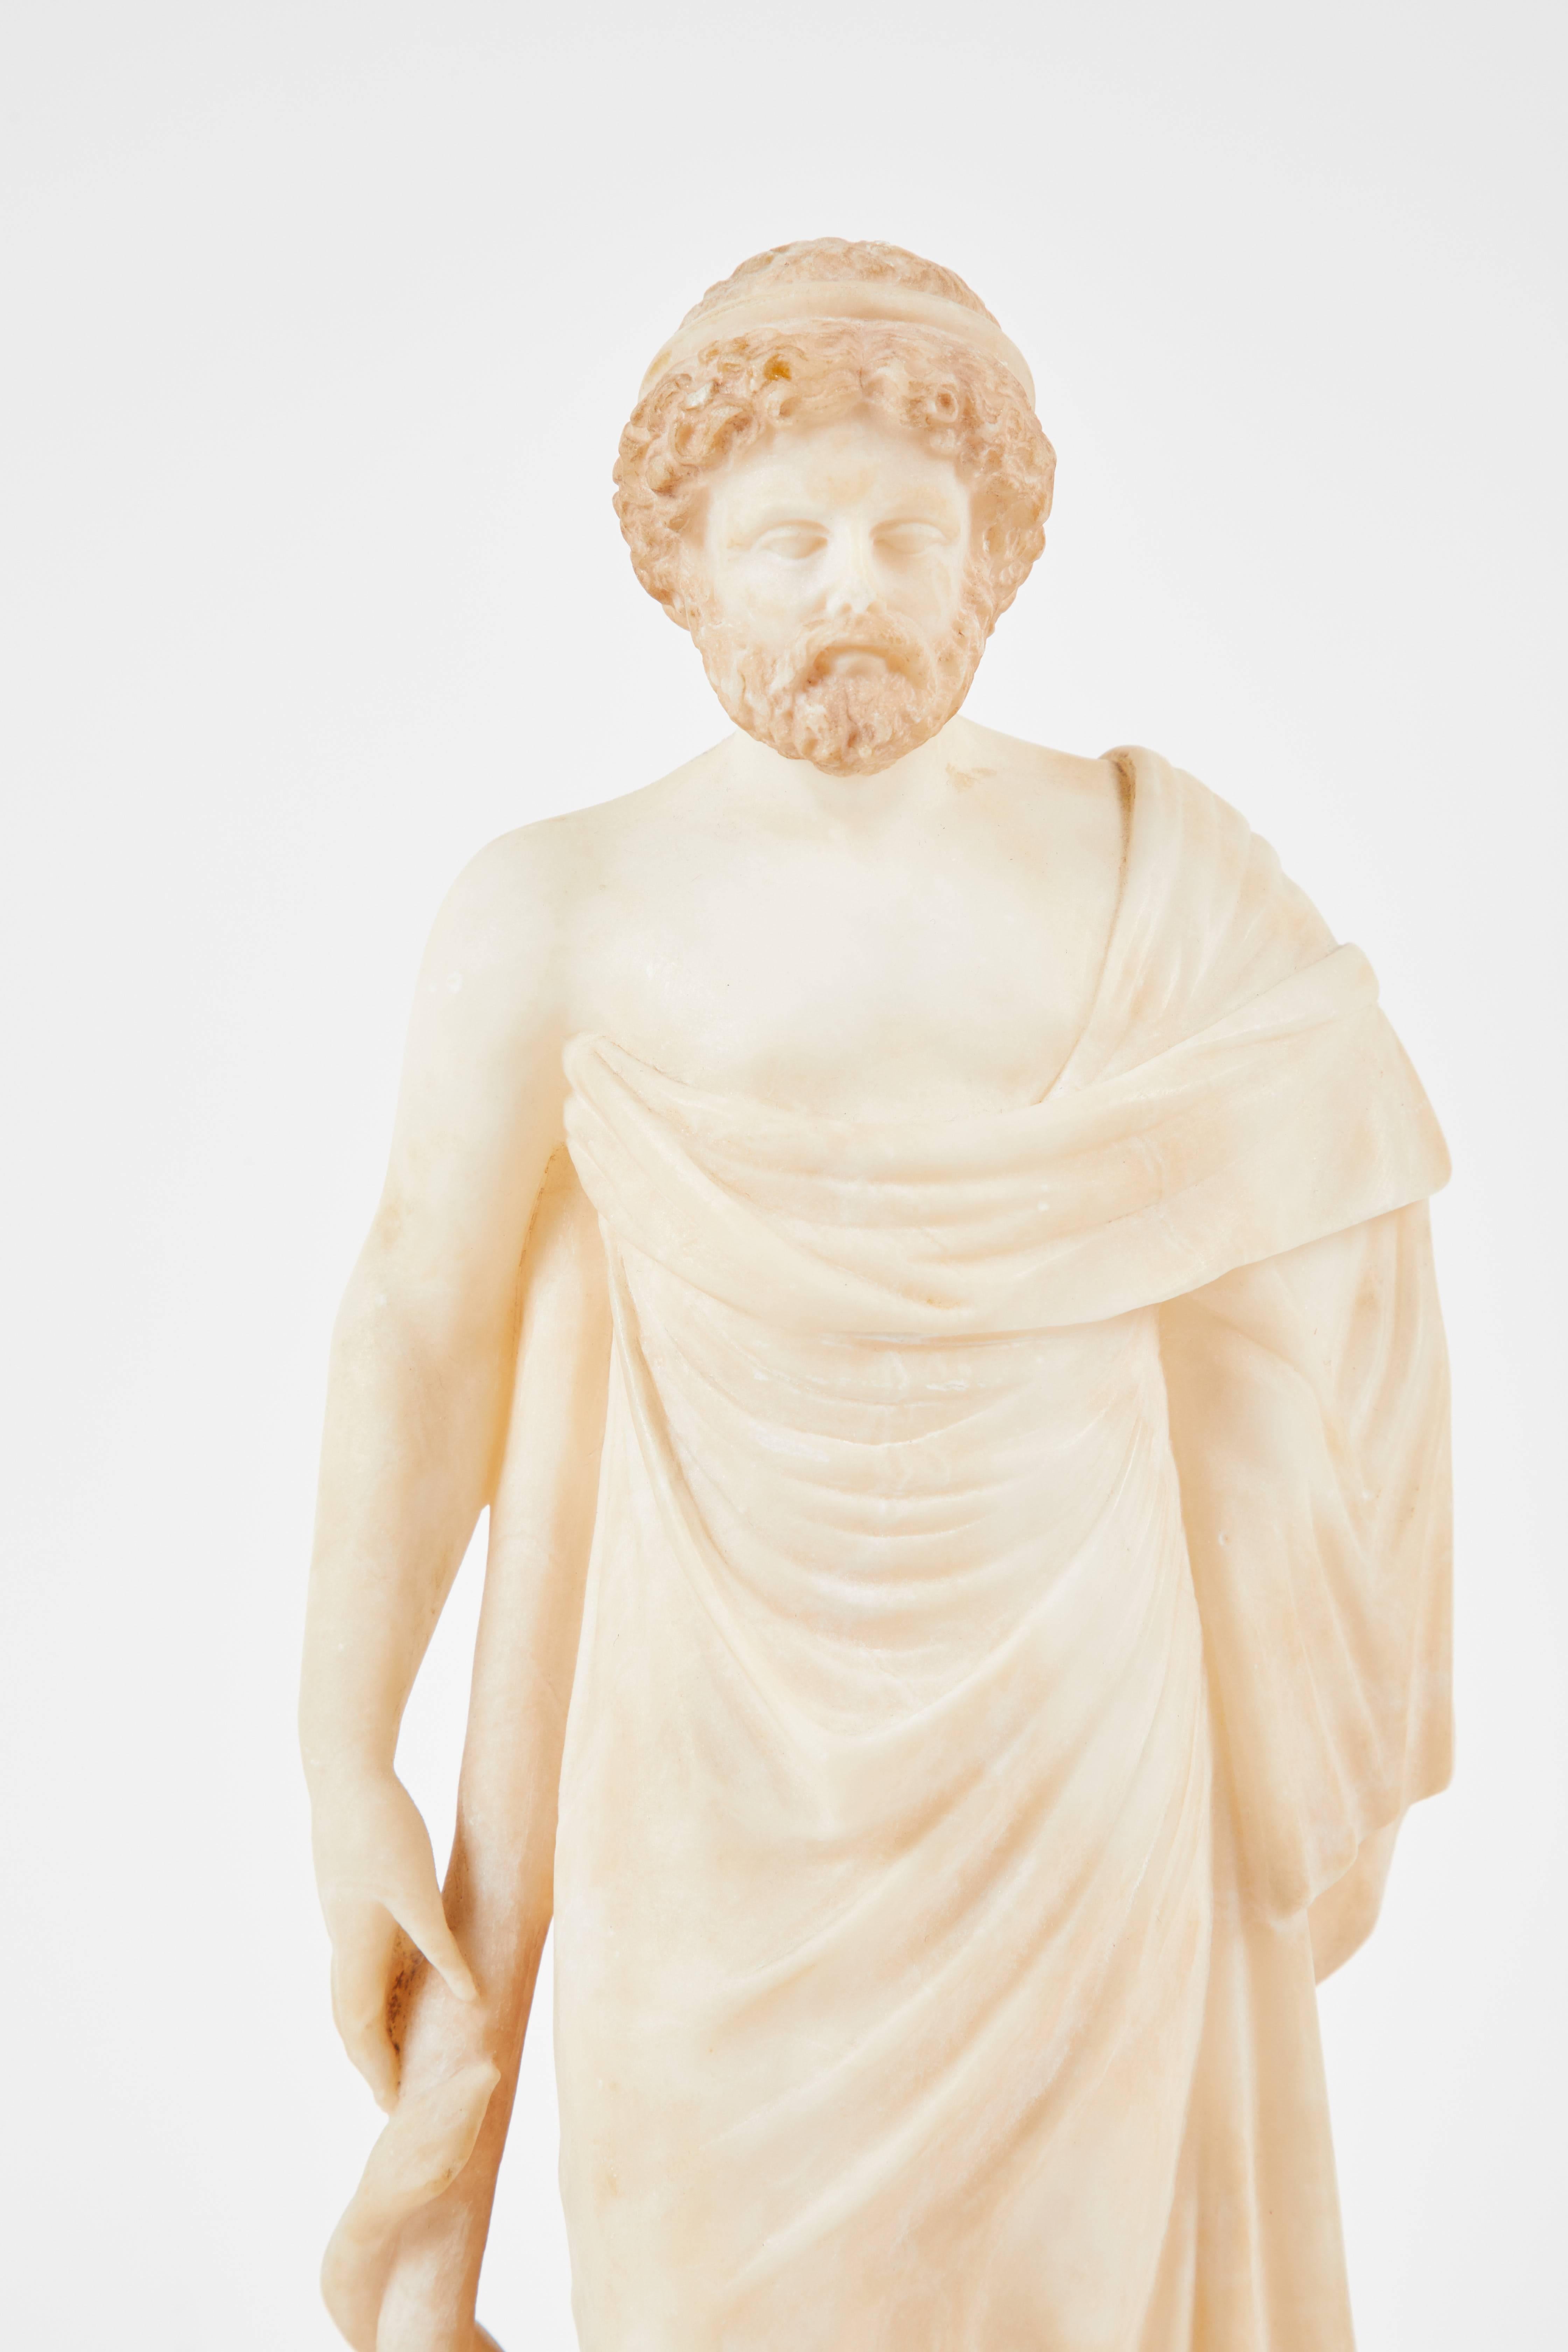 An Italian alabaster sculpture, circa 1860.  Perfect for desktop, coffee table or bookcase accessorizing or to add to an existing collection of 19th century sculptures.